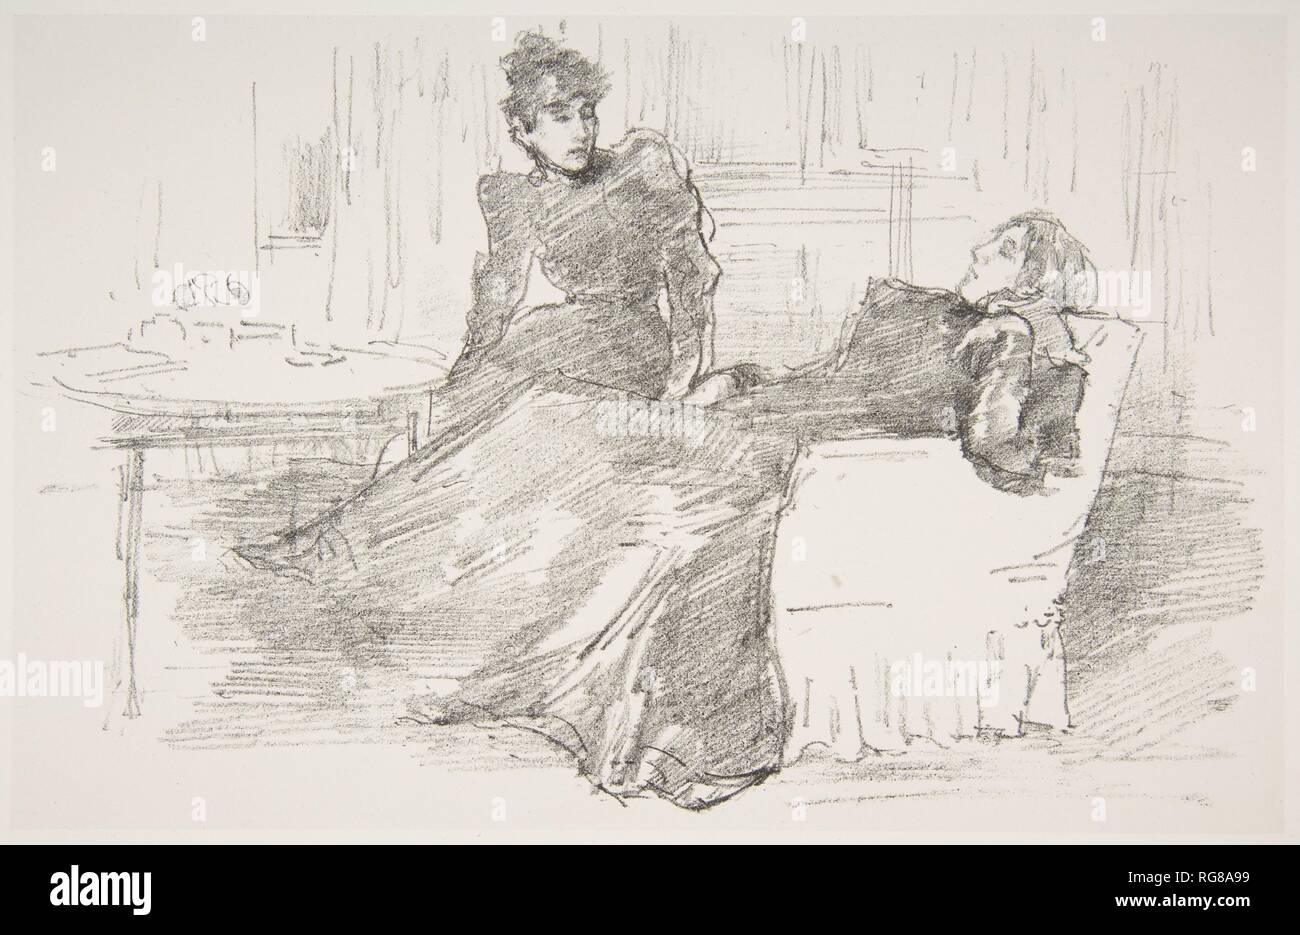 The Sisters. Artist: James McNeill Whistler (American, Lowell, Massachusetts 1834-1903 London). Dimensions: Image: 5 7/8 × 9 5/16 in. (15 × 23.6 cm)  Sheet: 9 1/8 × 13 1/2 in. (23.1 × 34.3 cm). Date: 1894-95. Museum: Metropolitan Museum of Art, New York, USA. Stock Photo